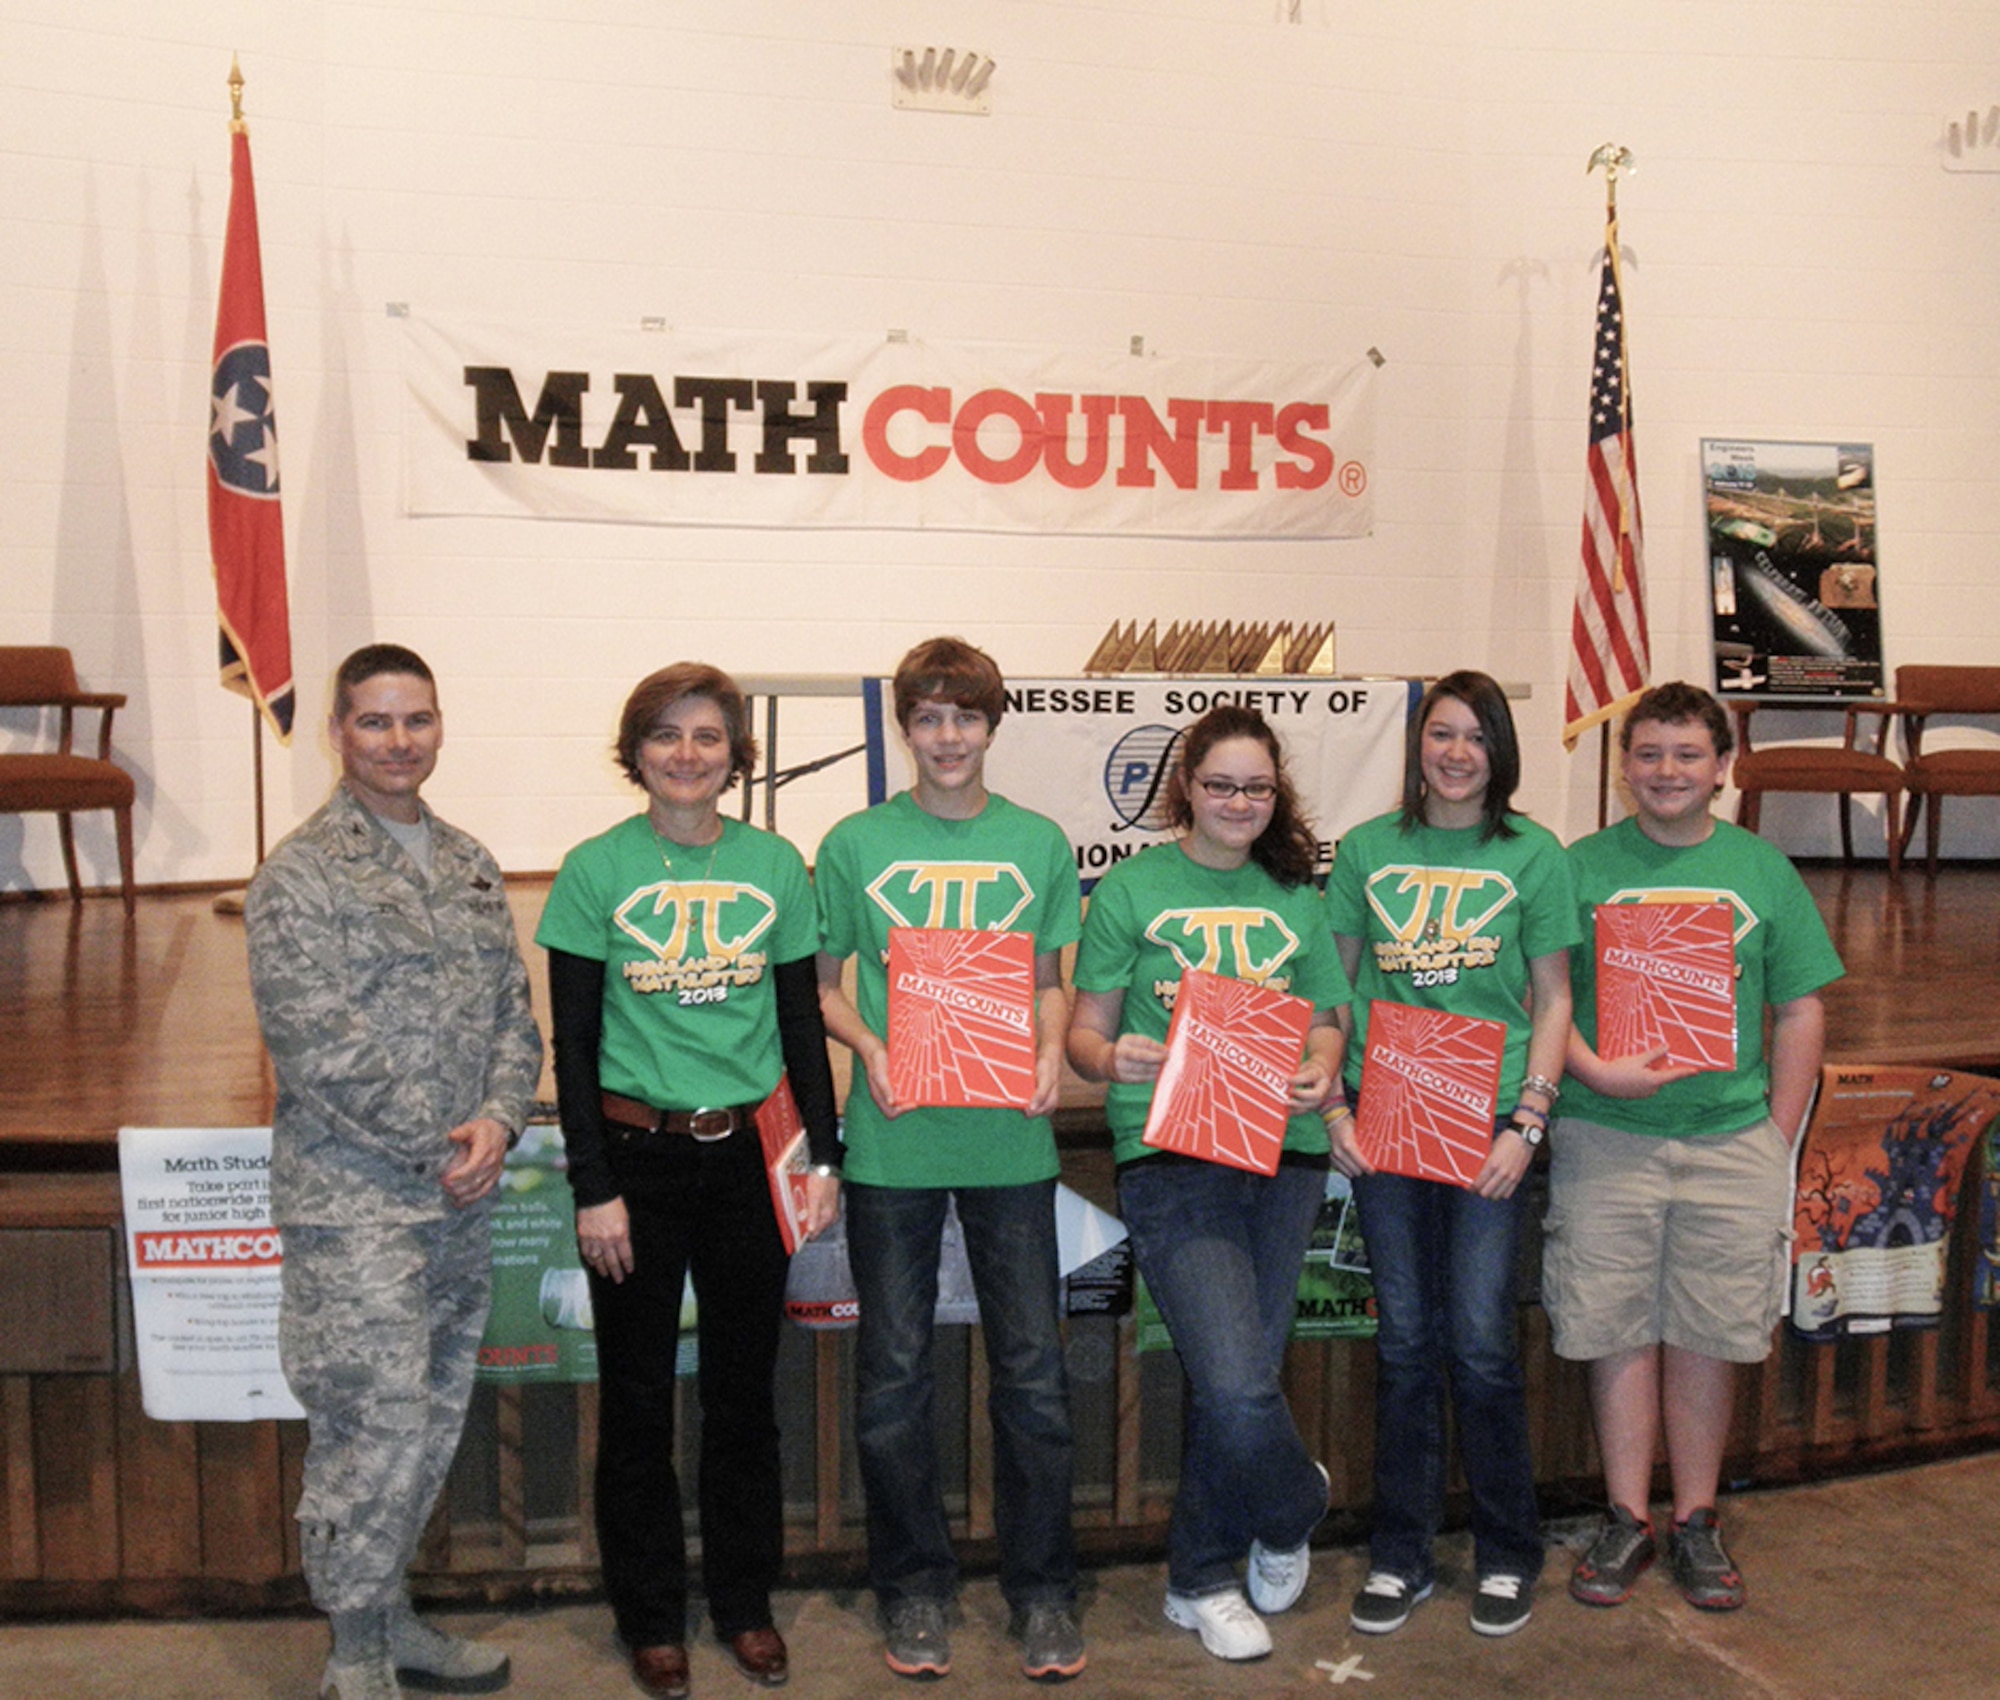 Pictured here are first-time MathCounts competitors from Harris Middle School, including (front row, left to right) Bryan young, 7th grader; Maddie Northcutt, 7th grader; Meghan Barnett, 6th grader;  Kassidy Brown, 7th grader; and Taylor Overcast, 7th grader; back row, from left, Arnold Engineering Development Complex Commander, Col. Raymond Toth, Chelsea Philpott (coach), Olivia Birkey (coach), Britney Herman, 8th grader; Denny Pan, 8th grader; Jesse Smotherman, 8th grader; Menley Saylor, 8th grader; and Marina Nelson, 8th grader. (Photo provided)